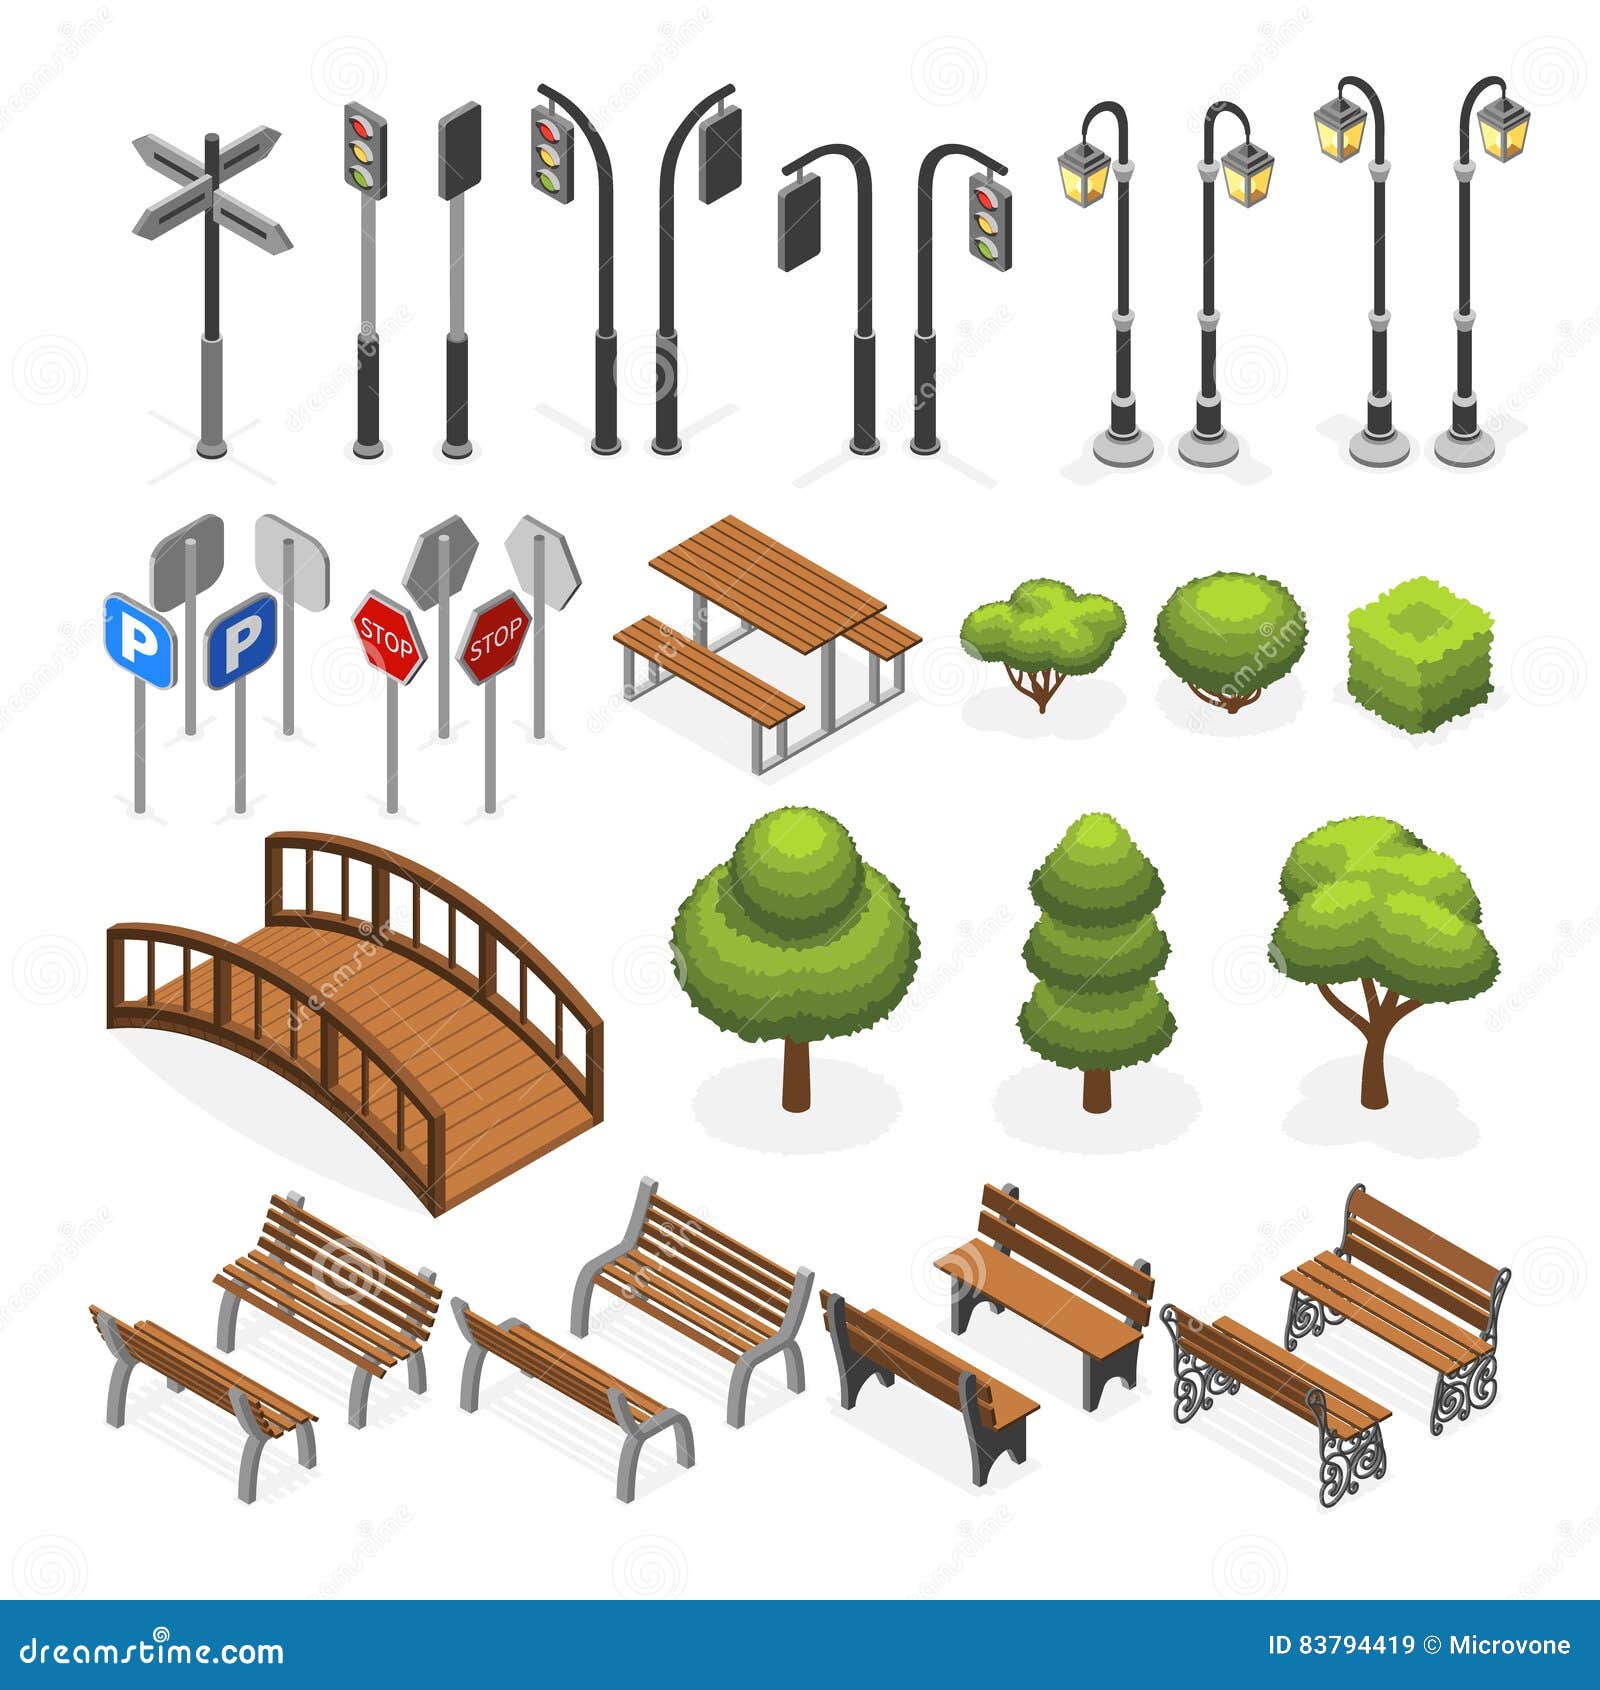 urban city street miniature isometric  objects, benches, trees, streetlight, seats, road signs